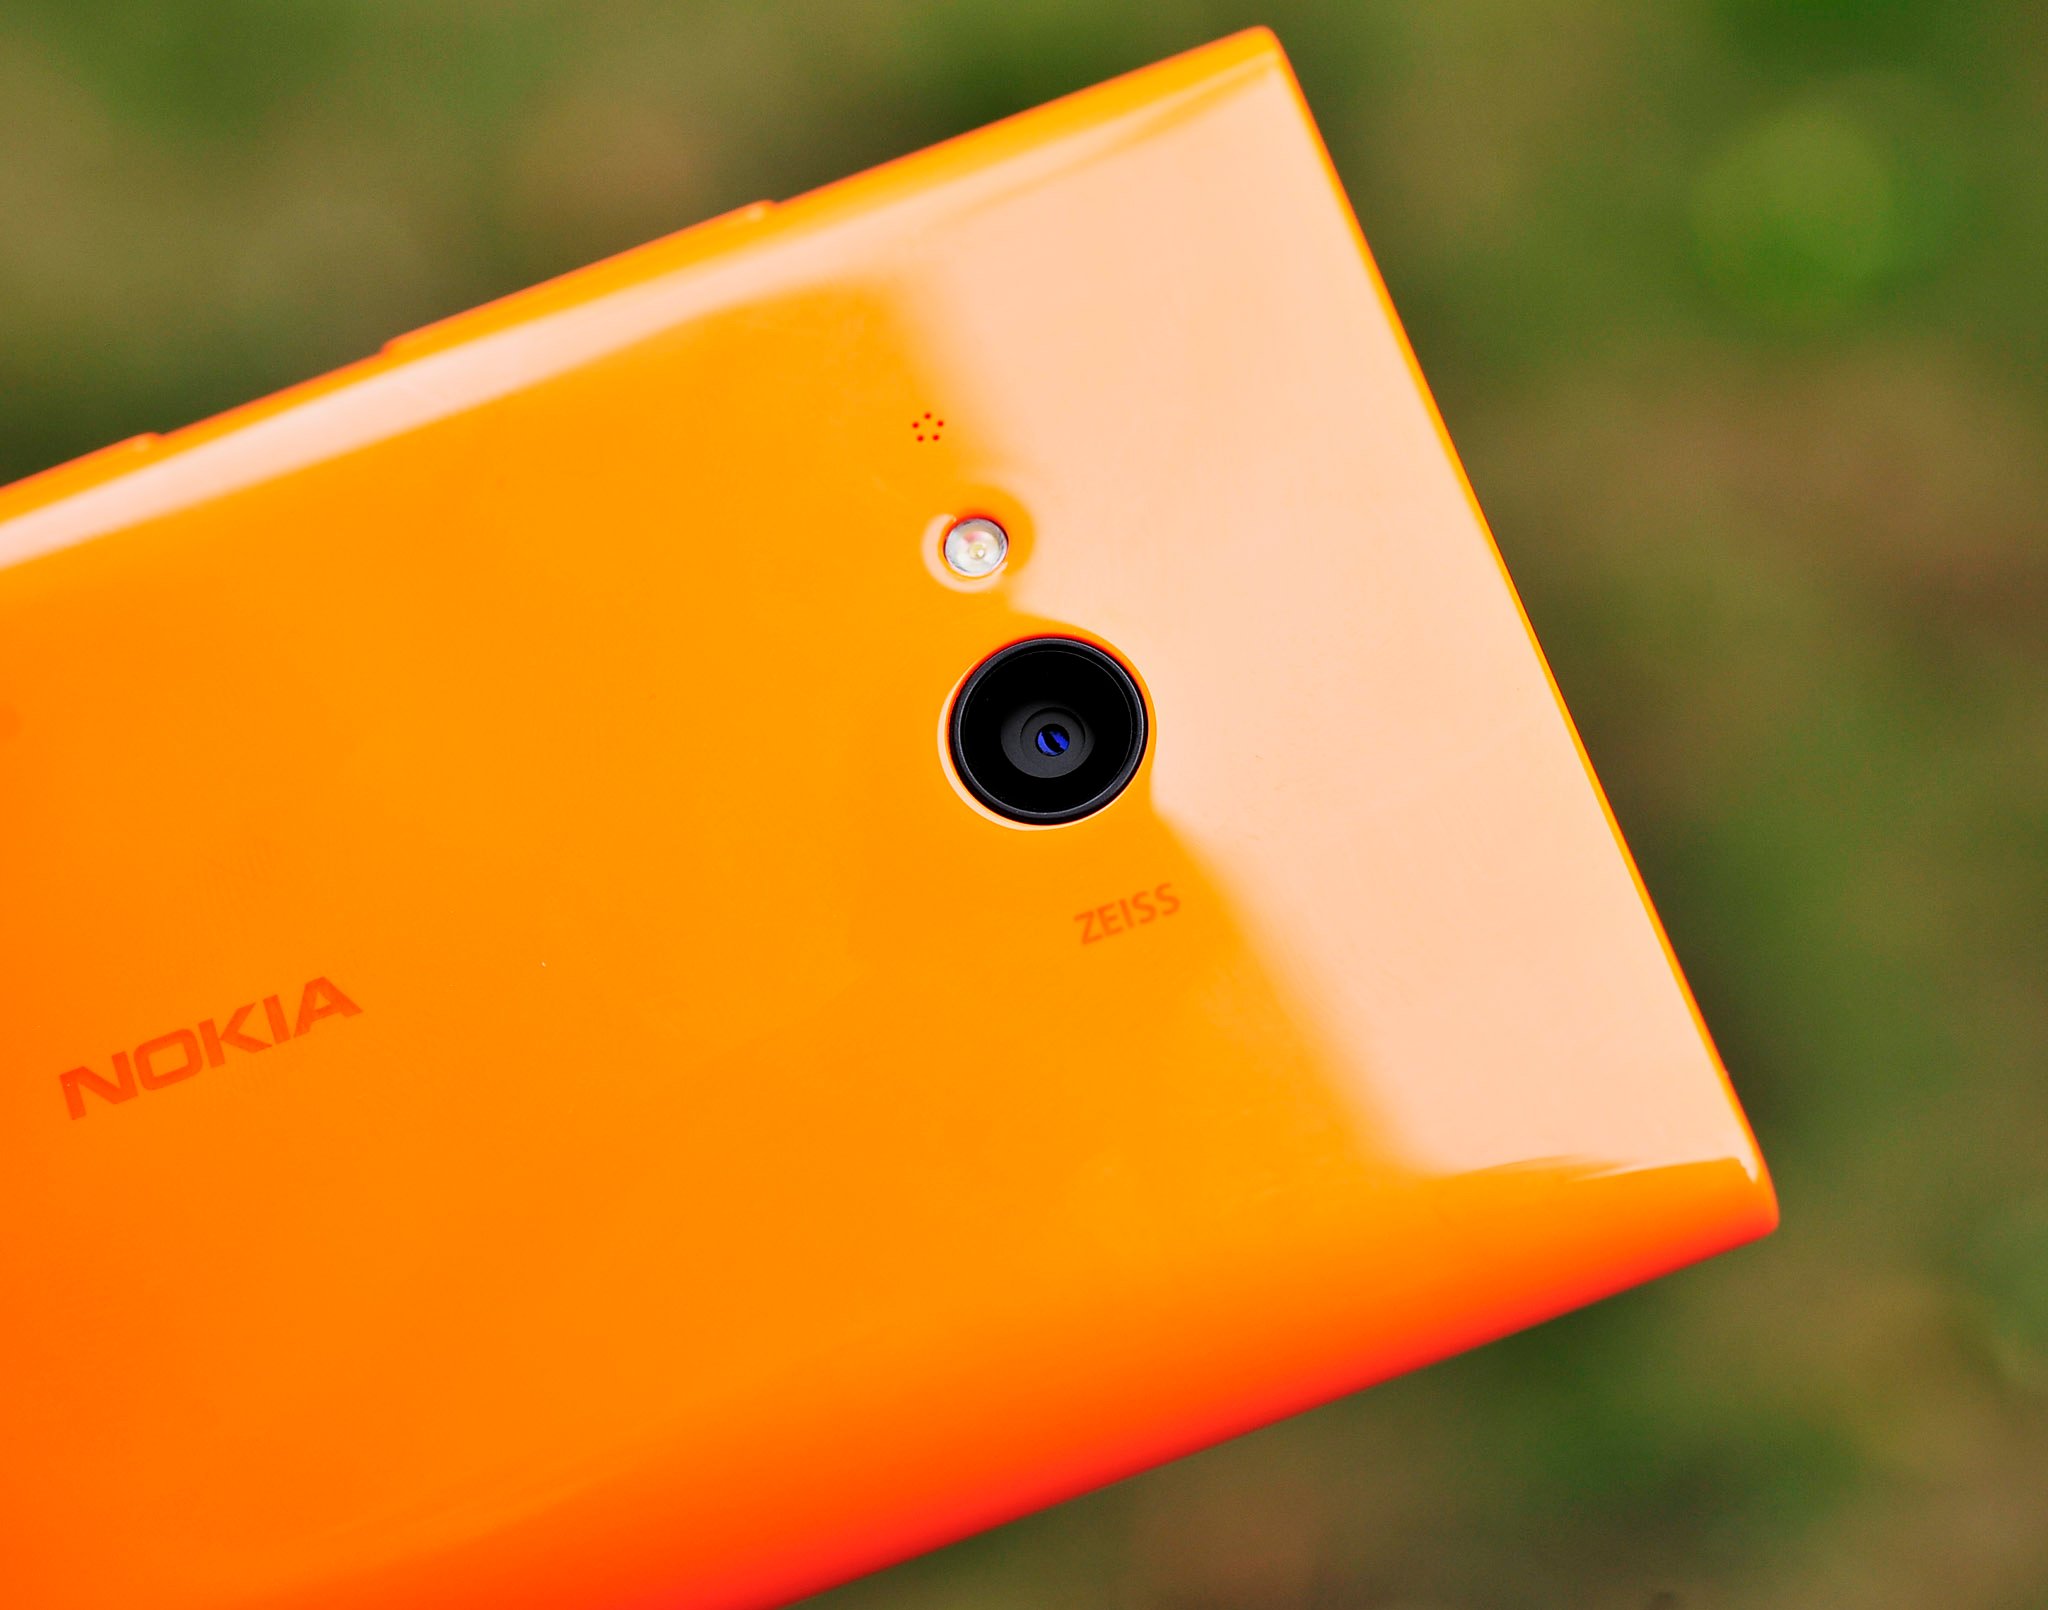 Nokia Lumia 625 - Unboxing and first impression; video and 